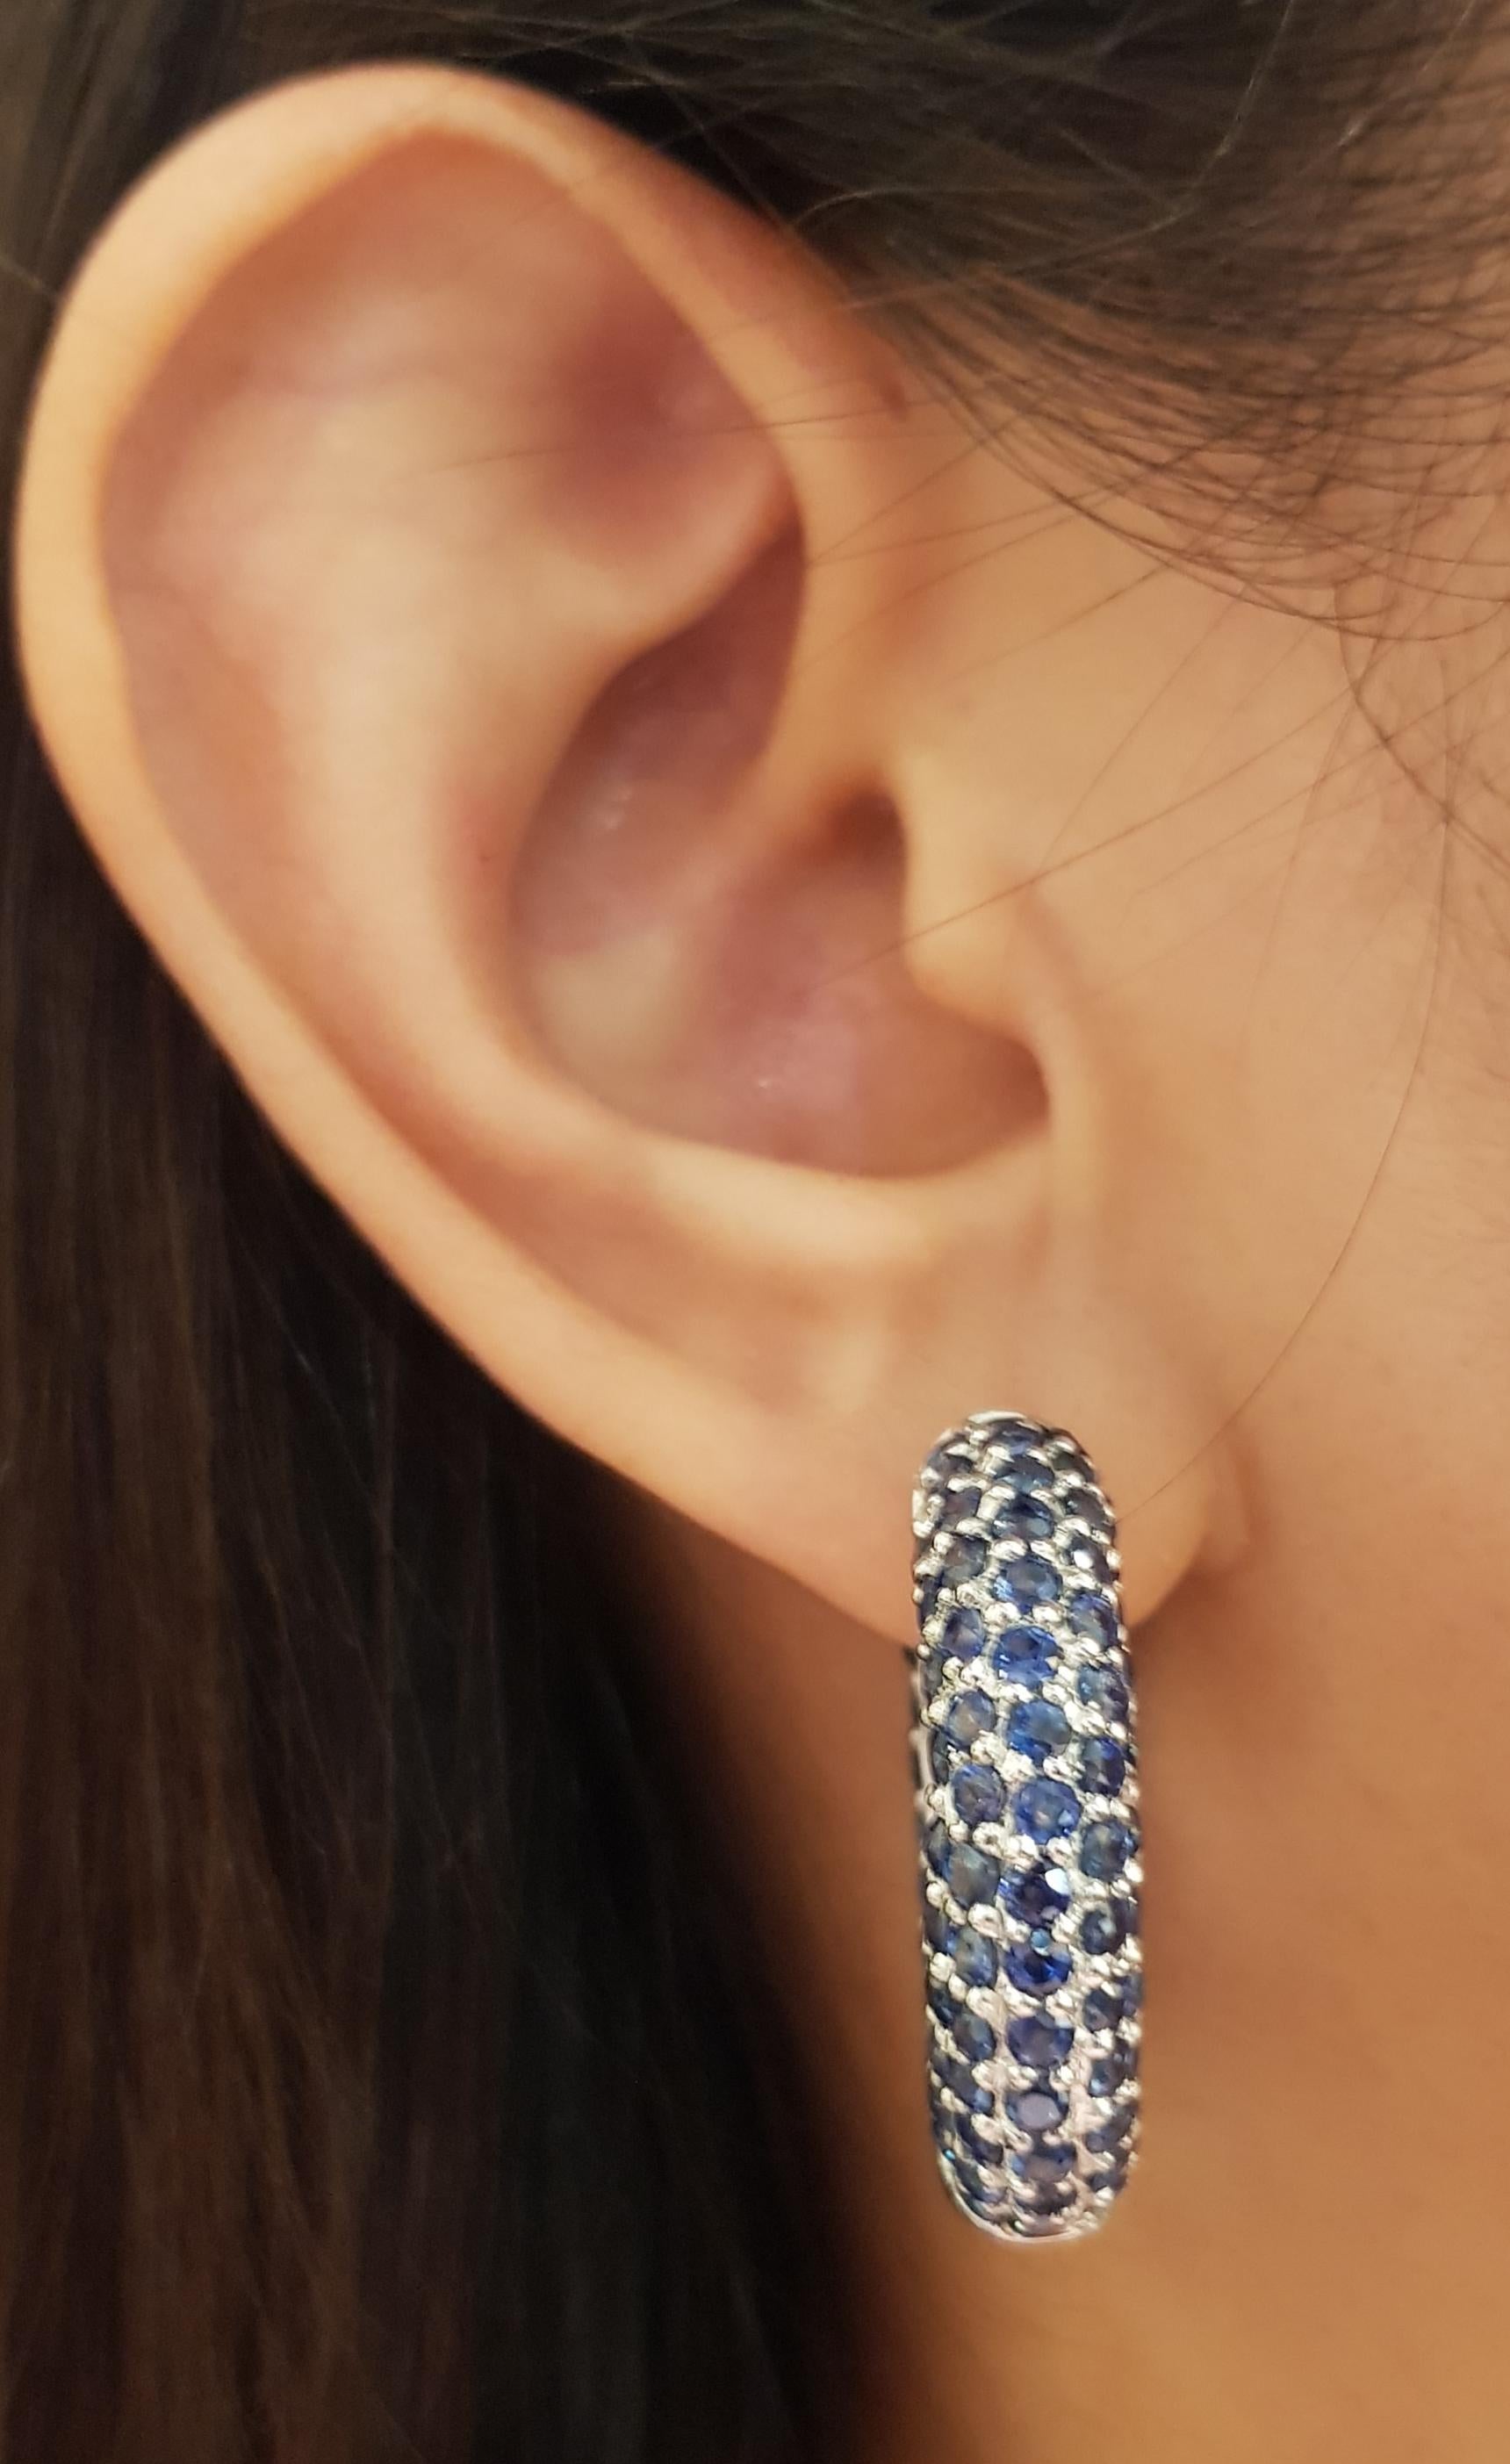 Blue Sapphire 19.14 carats Earrings set in Silver Settings

Width: 0.7 cm 
Length: 2.7 cm
Total Weight: 16.3 grams

*Please note that the silver setting is plated with rhodium to promote shine and help prevent oxidation.  However, with the nature of